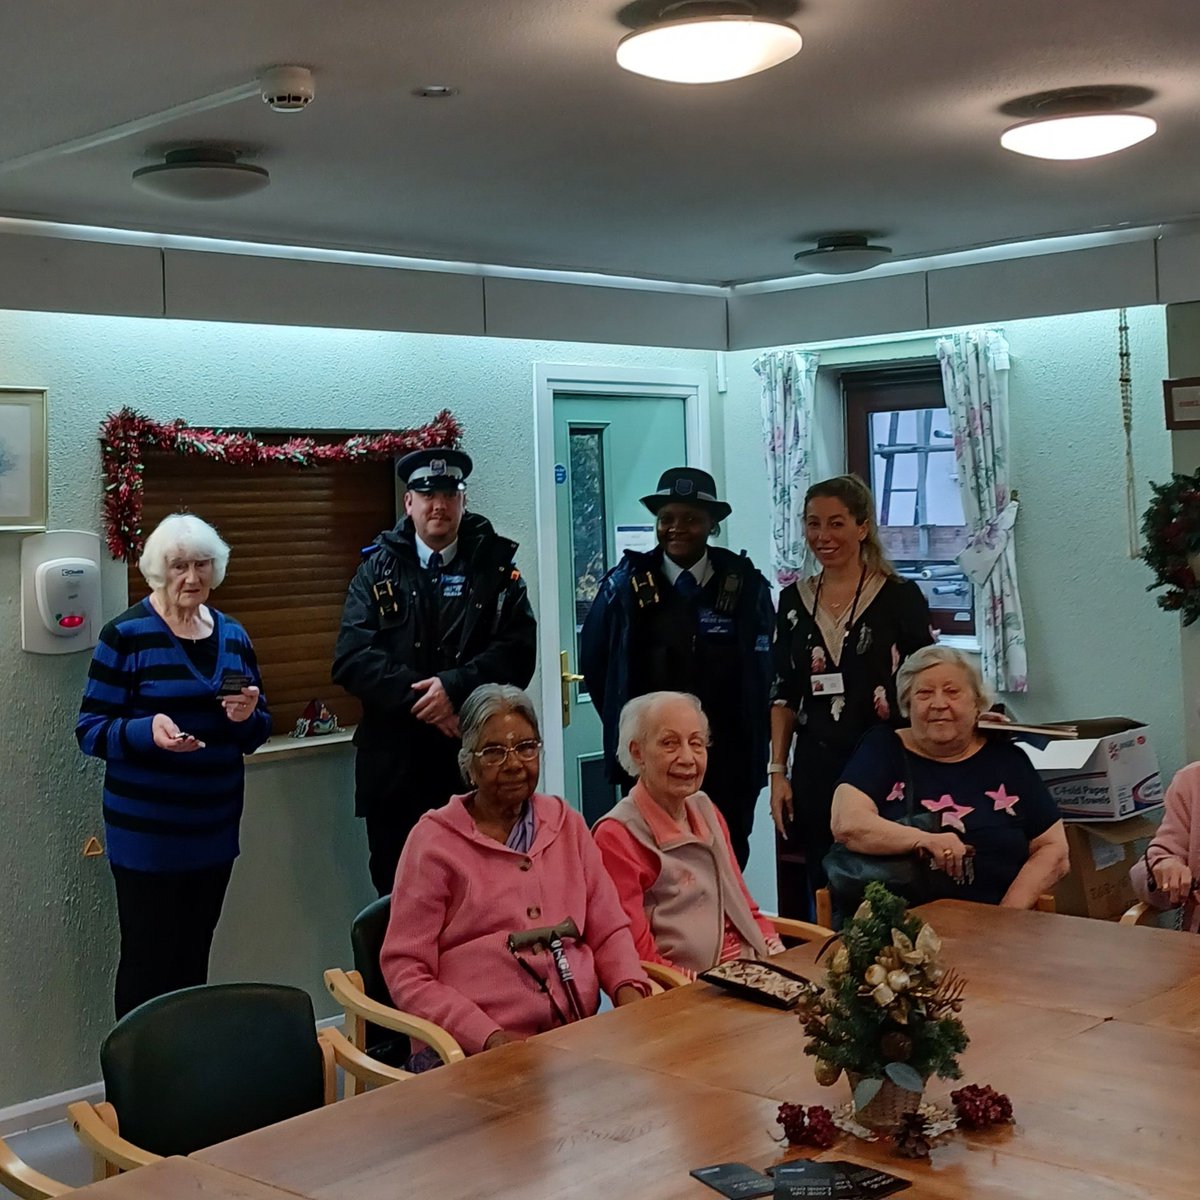 Personal Safety talk carried out today at one of our sheltered accommodations on the Stanmore ward. If you know ow anywhere on the ward that would benefit from a safety talk, let us know #vawg